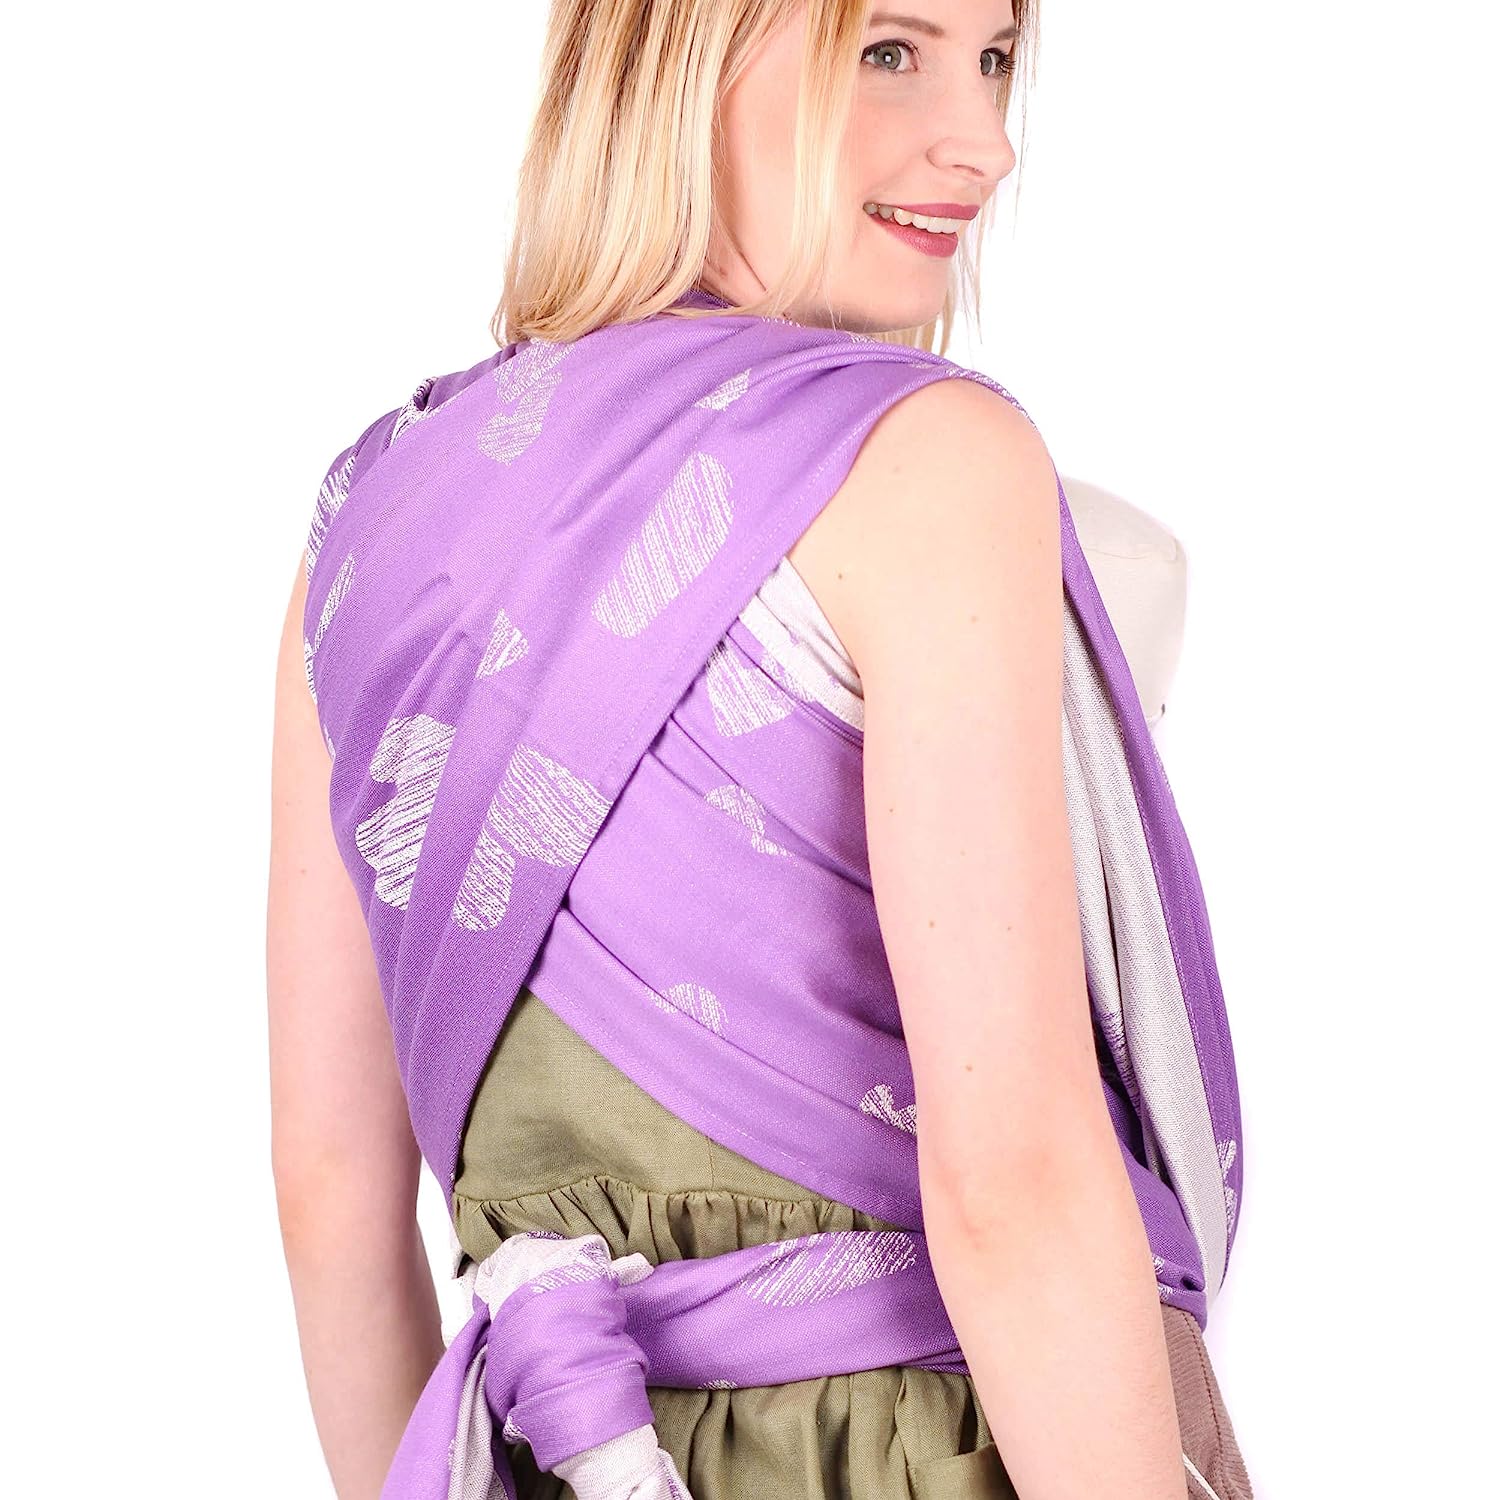 SCHMUSEWOLKE Baby Carrier Sling Jacquard Heartline Violet Shine Organic Cotton 80 x 485 cm Baby Size Toddler Size Baby and Toddler 9-60 Months 6-16 kg Belly and Back Carrier Cloth